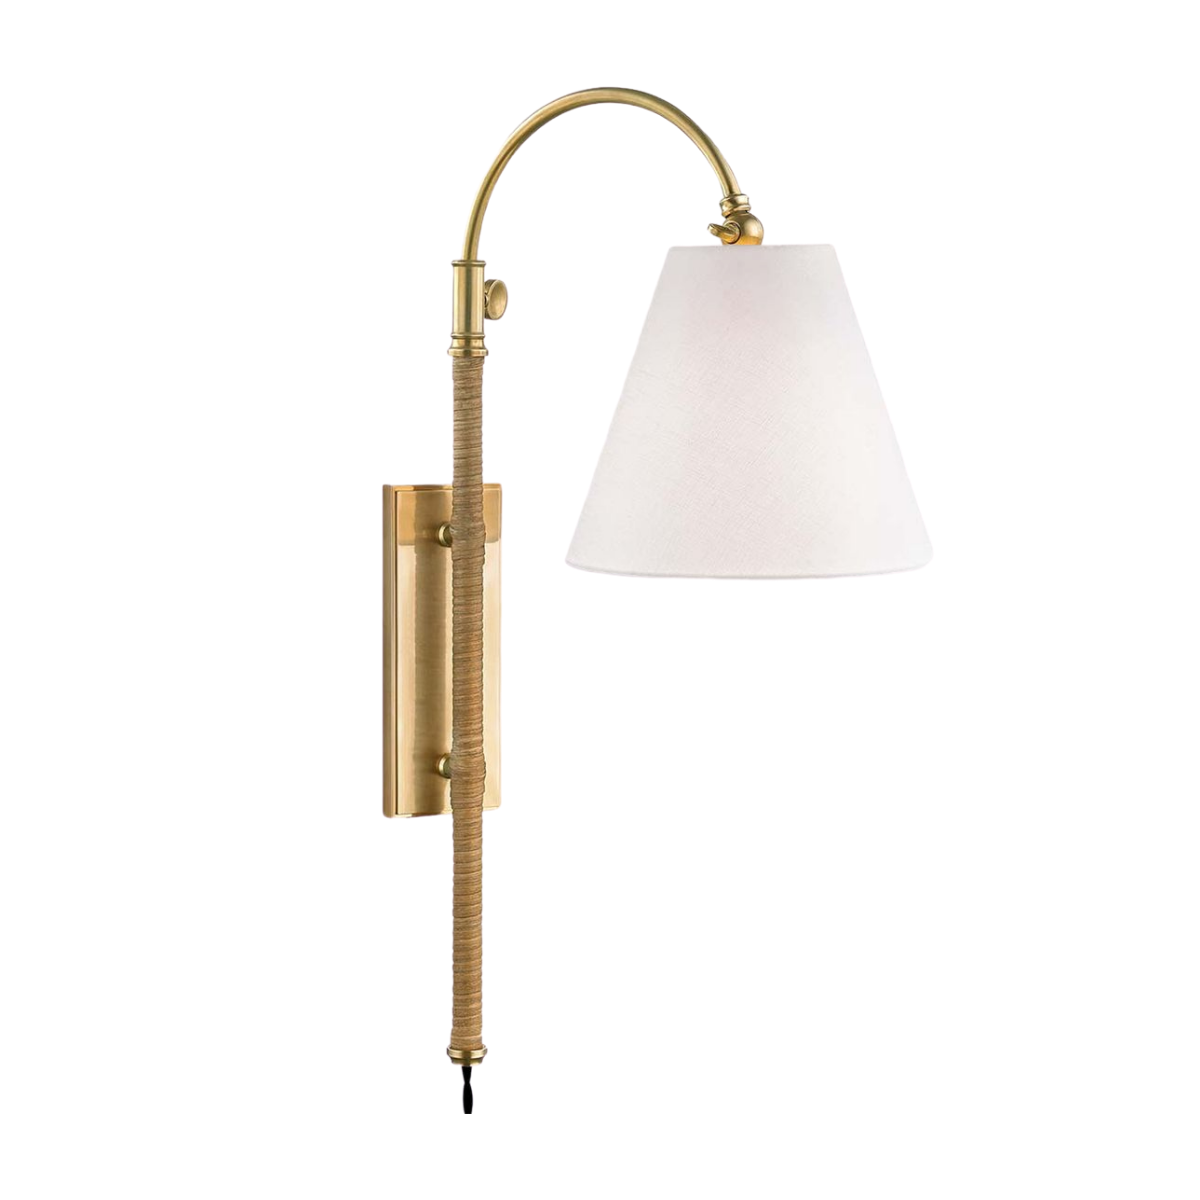 High/Low List: Modern Traditional Furniture & Decor - Brass wall sconce with cone shade. High end decor and their budget friendly lookalikes. | Nadine Stay